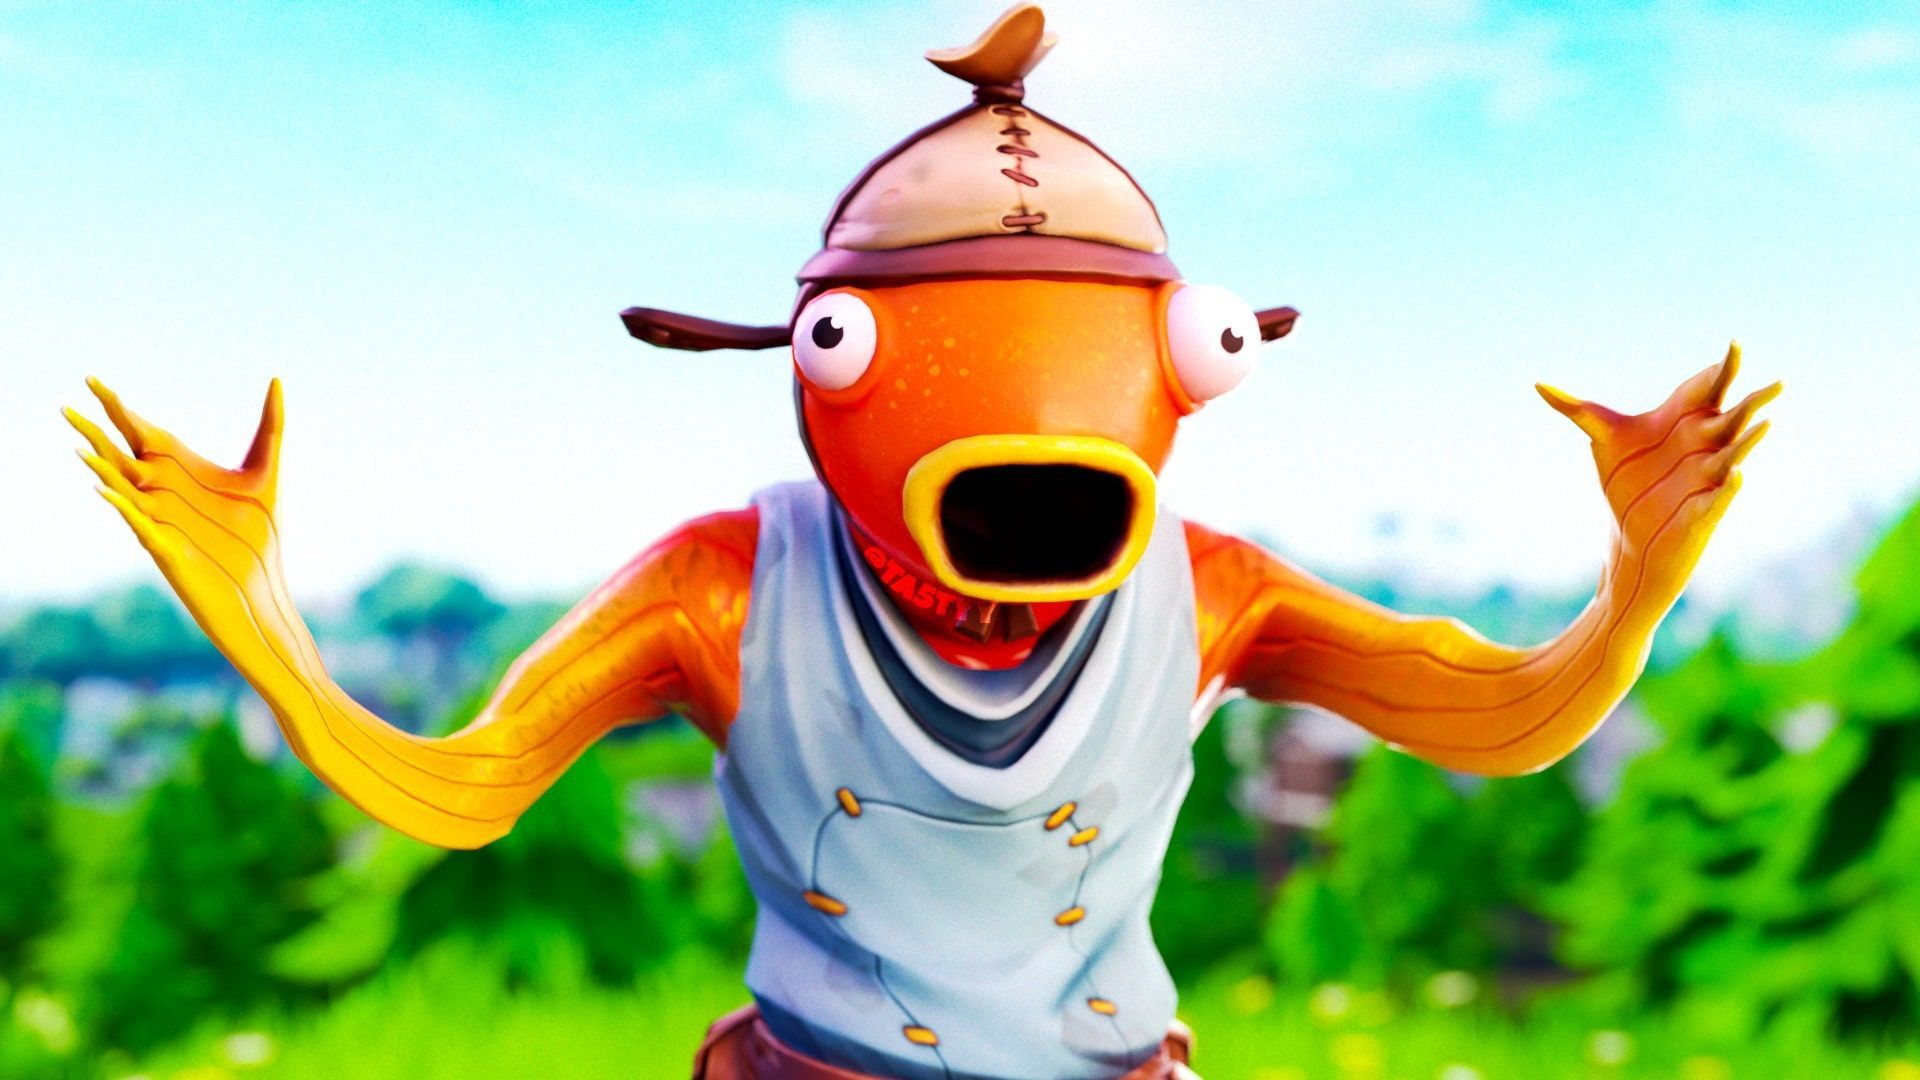 Download wallpapers 4k Fishstick blue grunge background 2020 games  Fortnite vortex Fortnite characters Fishstick Skin Fortnite Battle  Royale Fishstick Fortnite for desktop with resolution 3840x2400 High  Quality HD pictures wallpapers